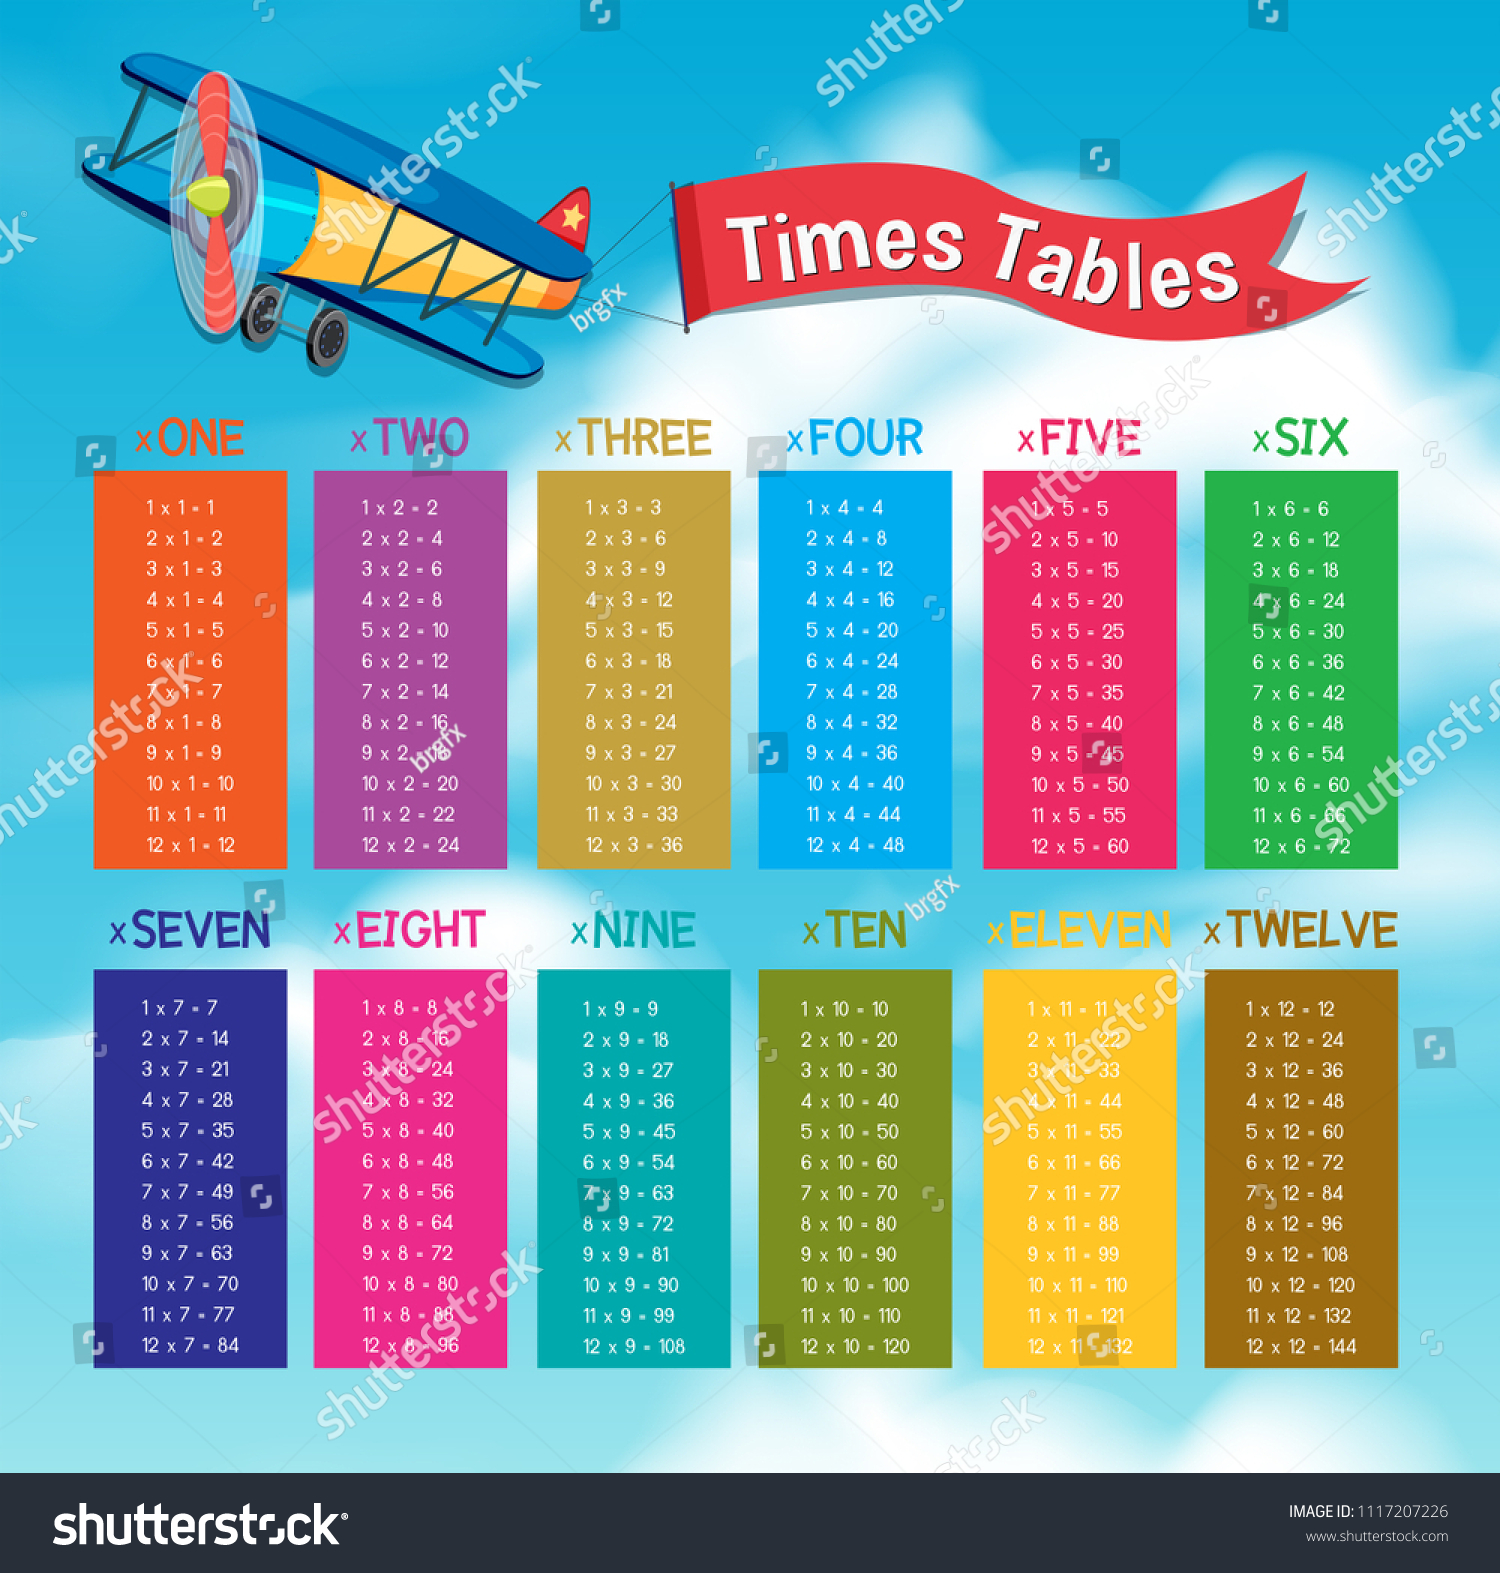 Colourful Math Times Tables On Sky Royalty Free Stock Image